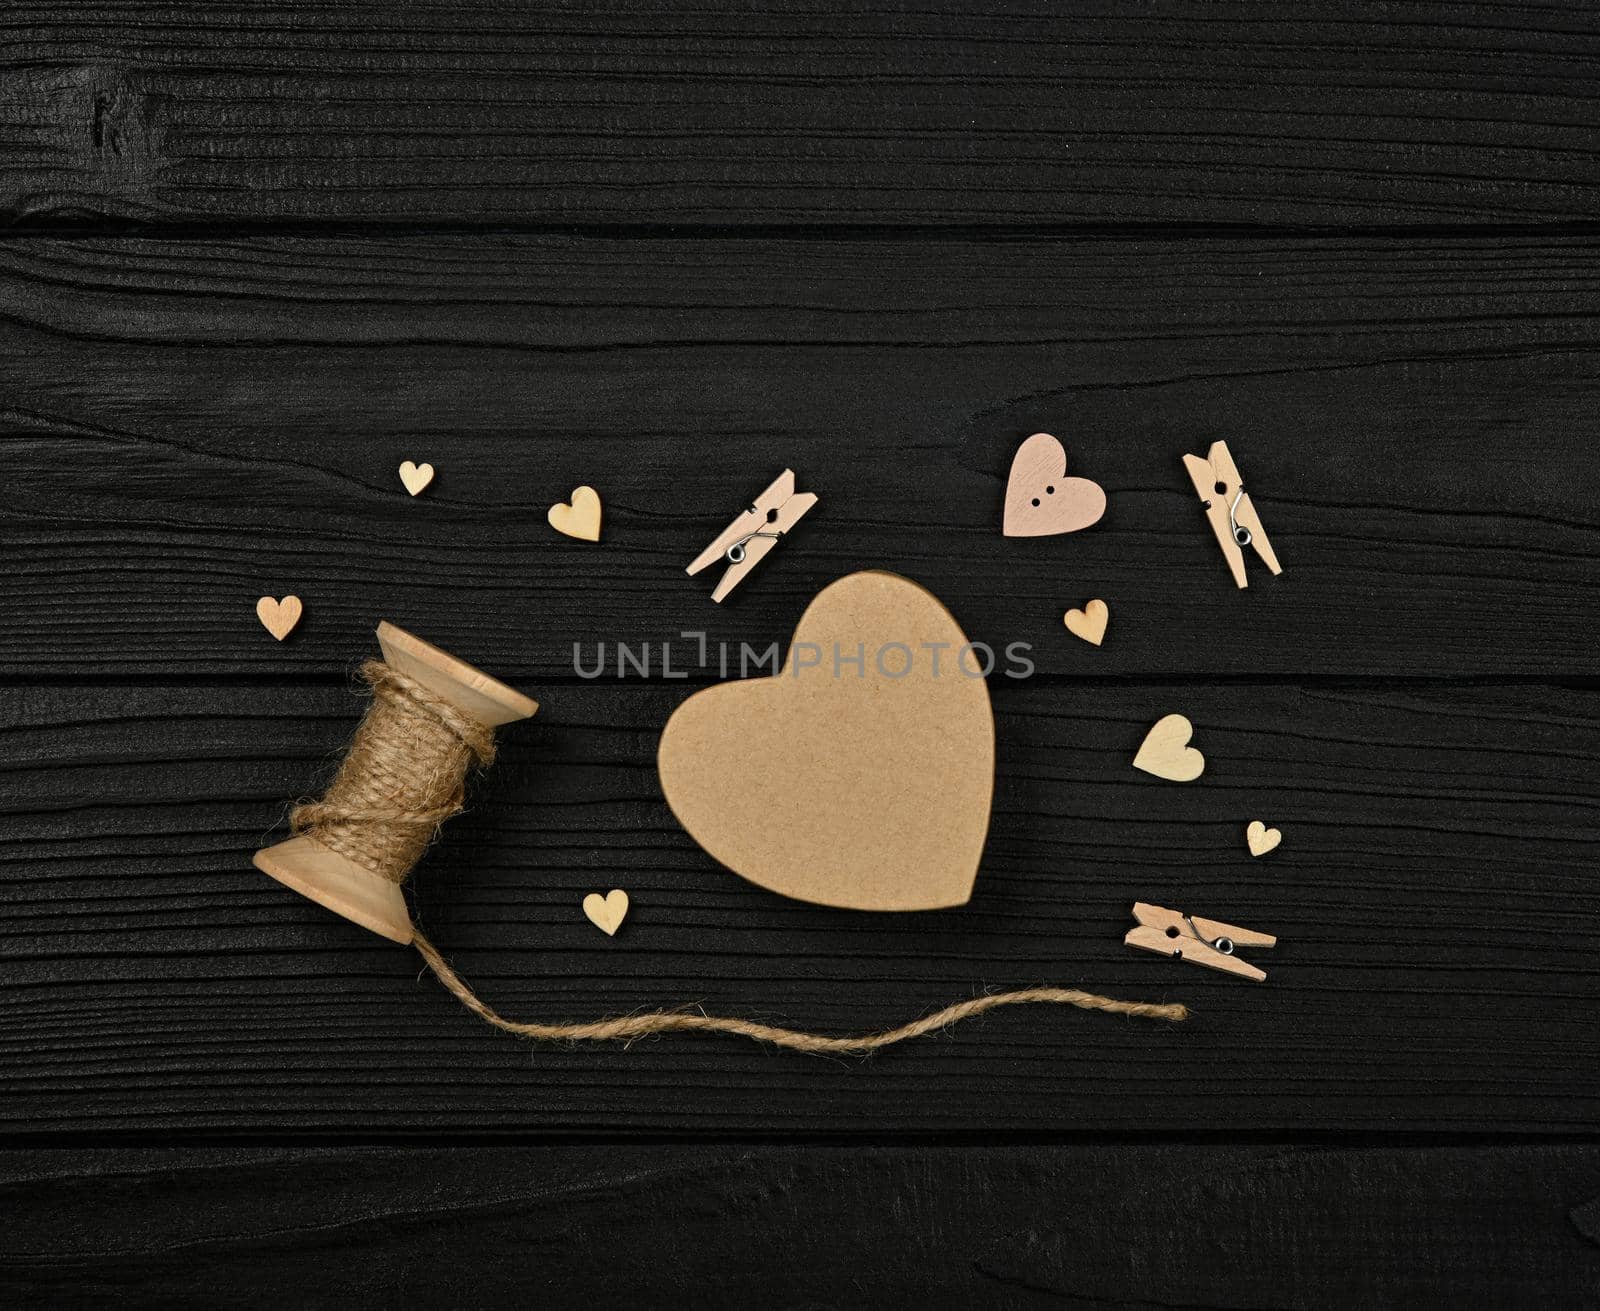 Preparing Valentine gifts, brown paper box, hearts, twine, clothespins on black wooden table background, close up flat lay, elevated top view, directly above